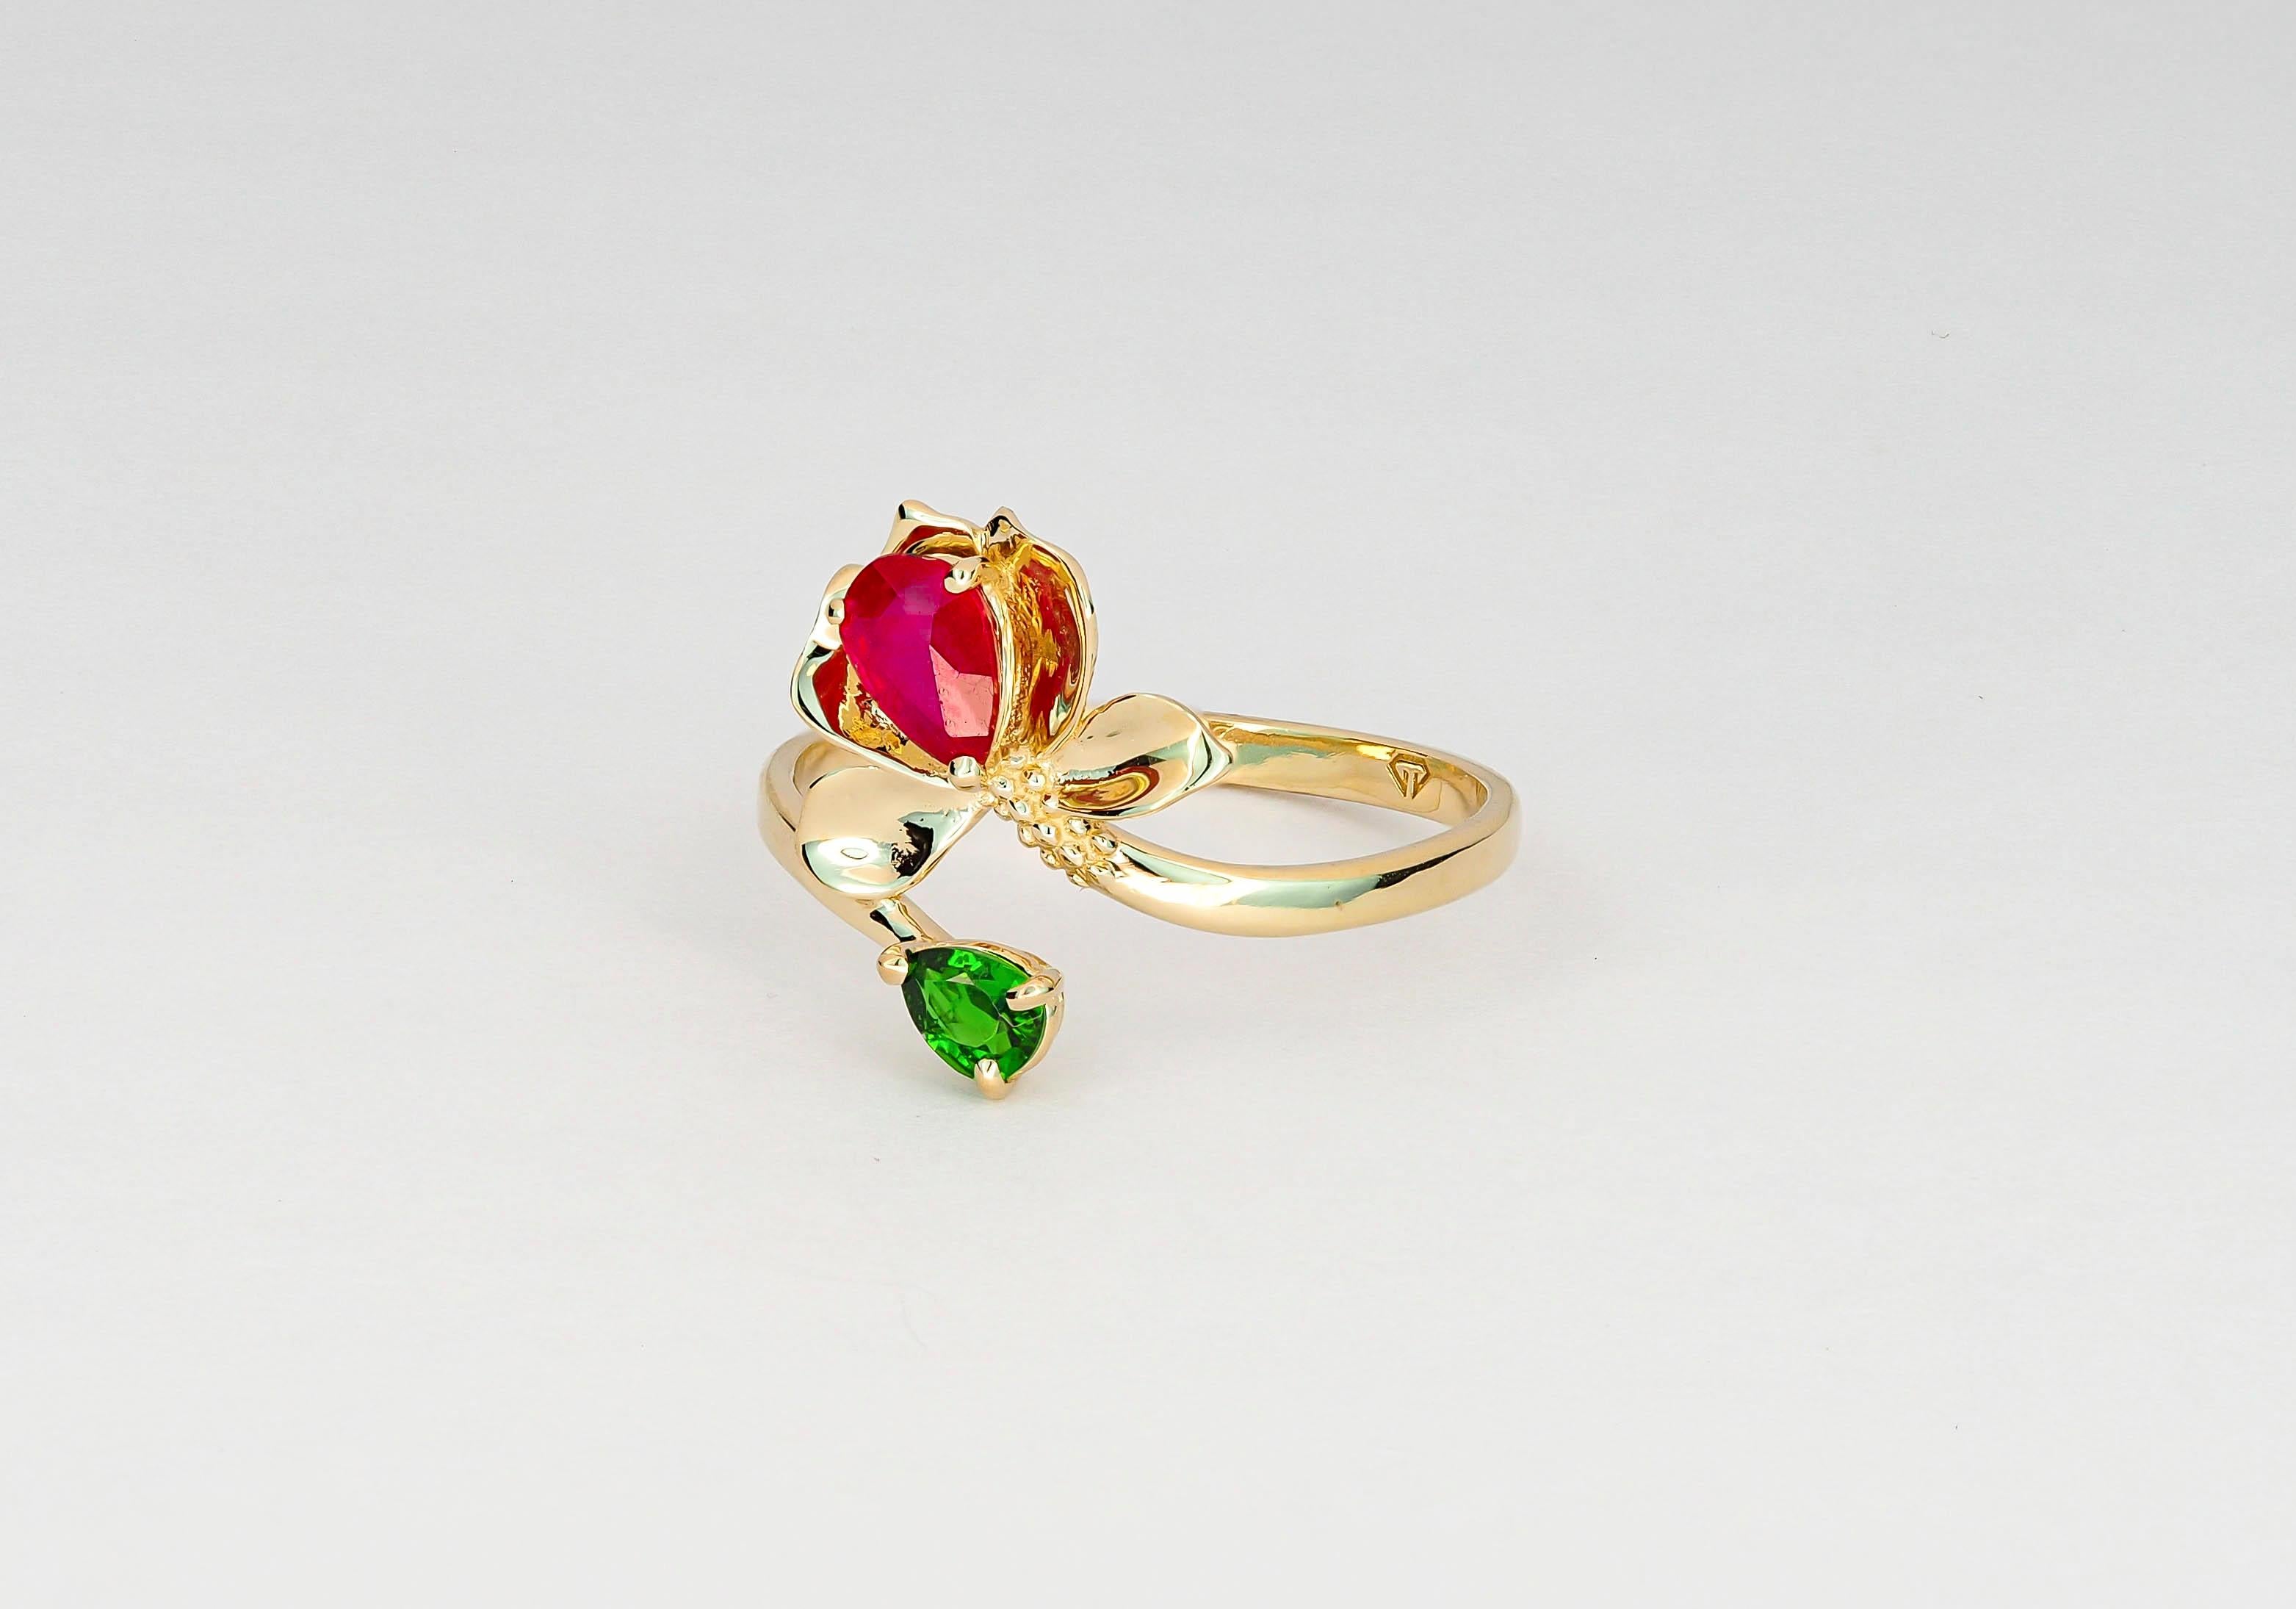 For Sale:  14 K Gold Ring with Ruby and Chrome Diopside. Water Lily Flower Gold Ring! 7